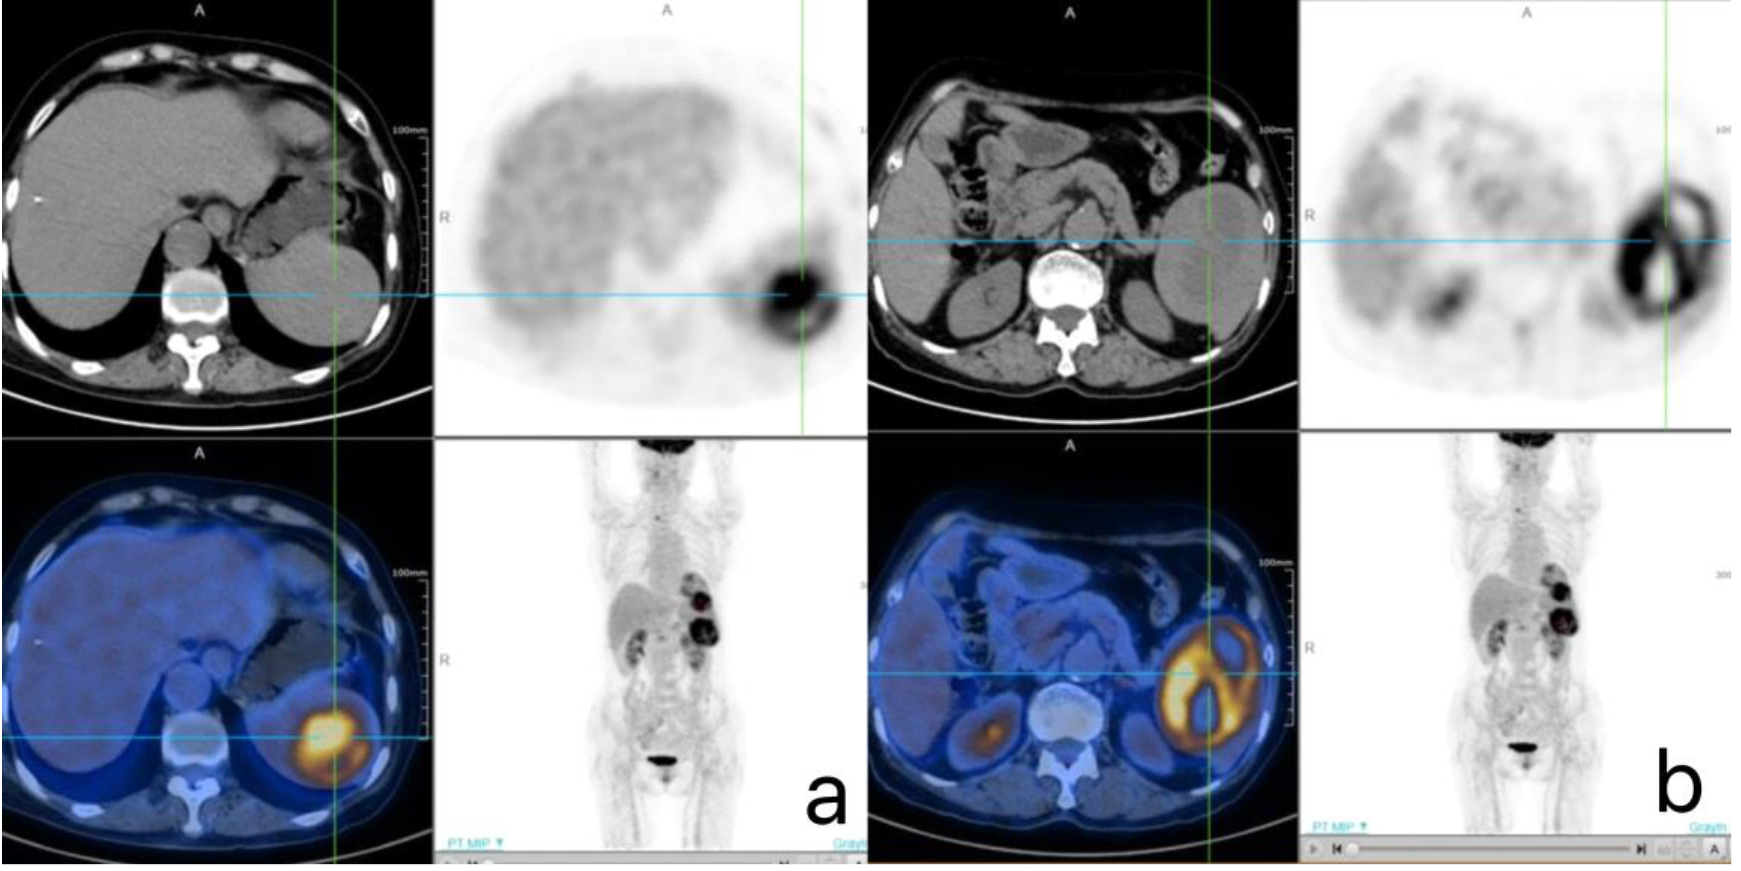 PET/CT images of EBV-positive inflammatory FDCS, which reveal increased metabolic activity within the masses. (a) The tumor SUV is 10.8, (b) The tumor SUV is 8.3.